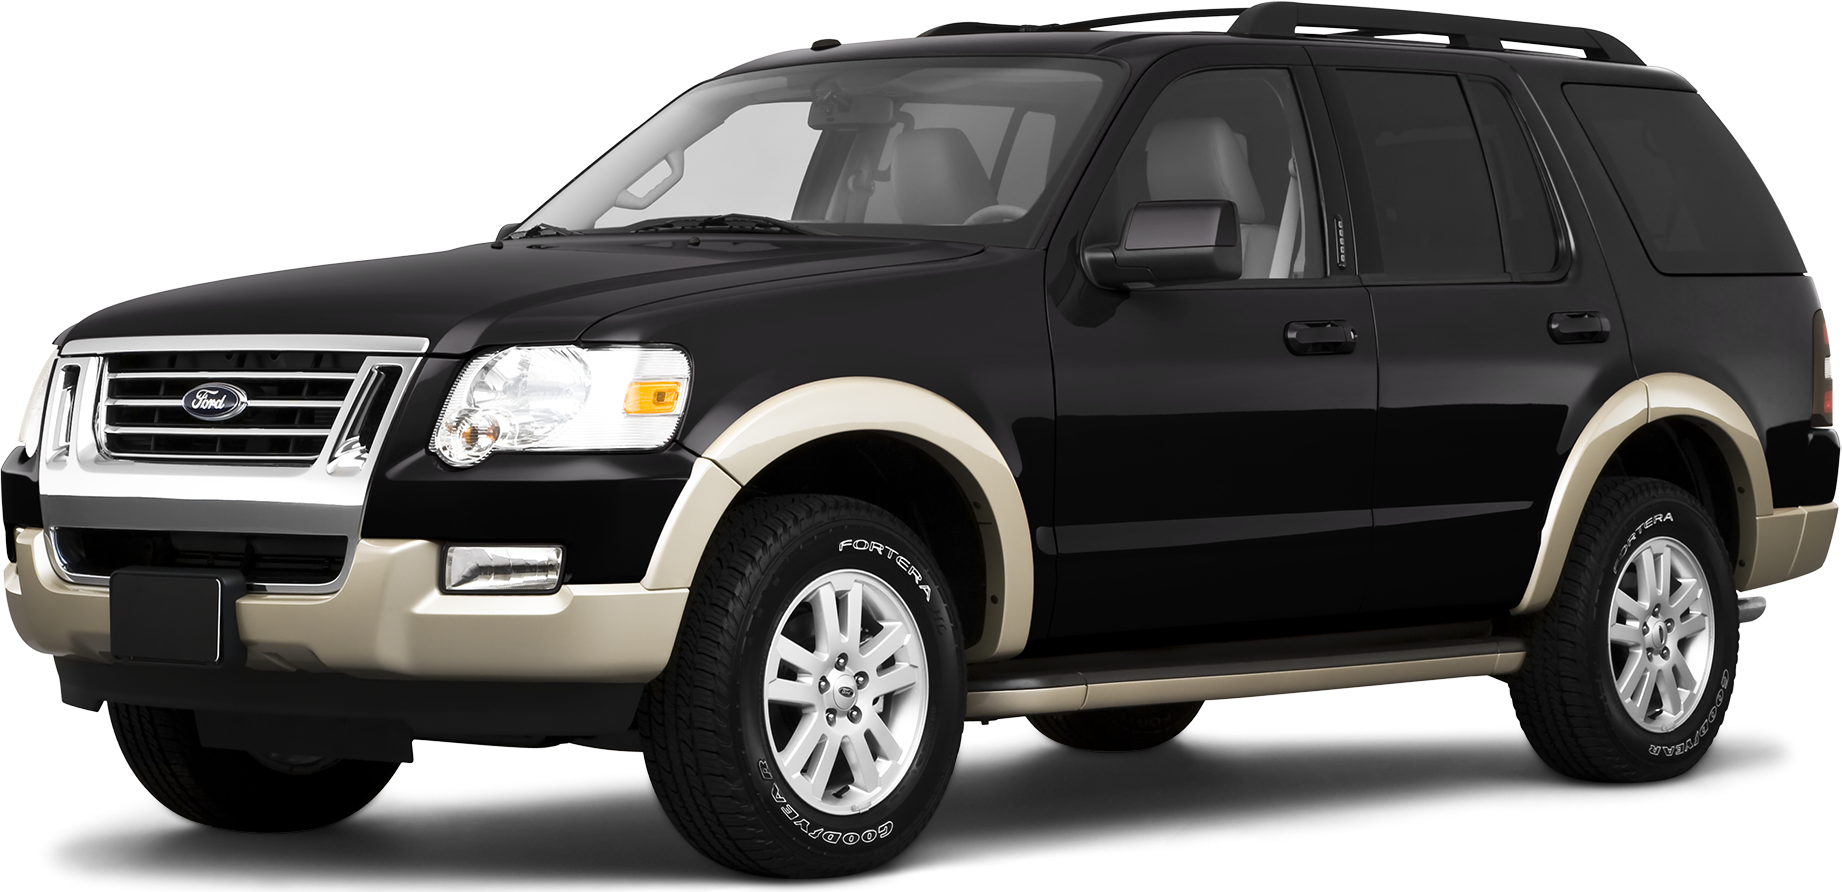 10 Ford Explorer Values Cars For Sale Kelley Blue Book